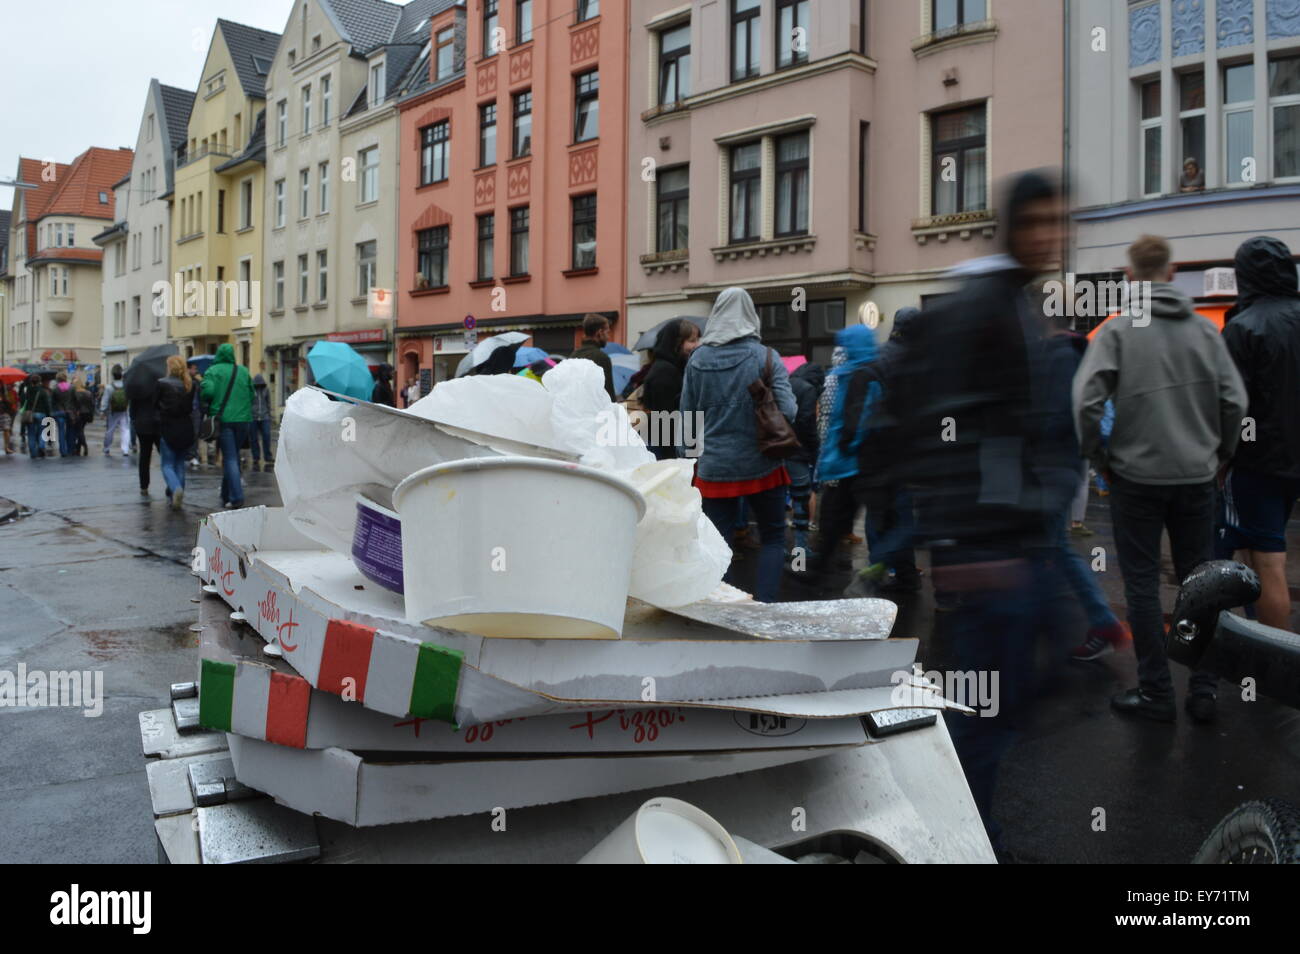 Cologne, Germany - May 31, 2015 - Waste as a mean problem in big cities and metropoles with people walking by during rain Stock Photo